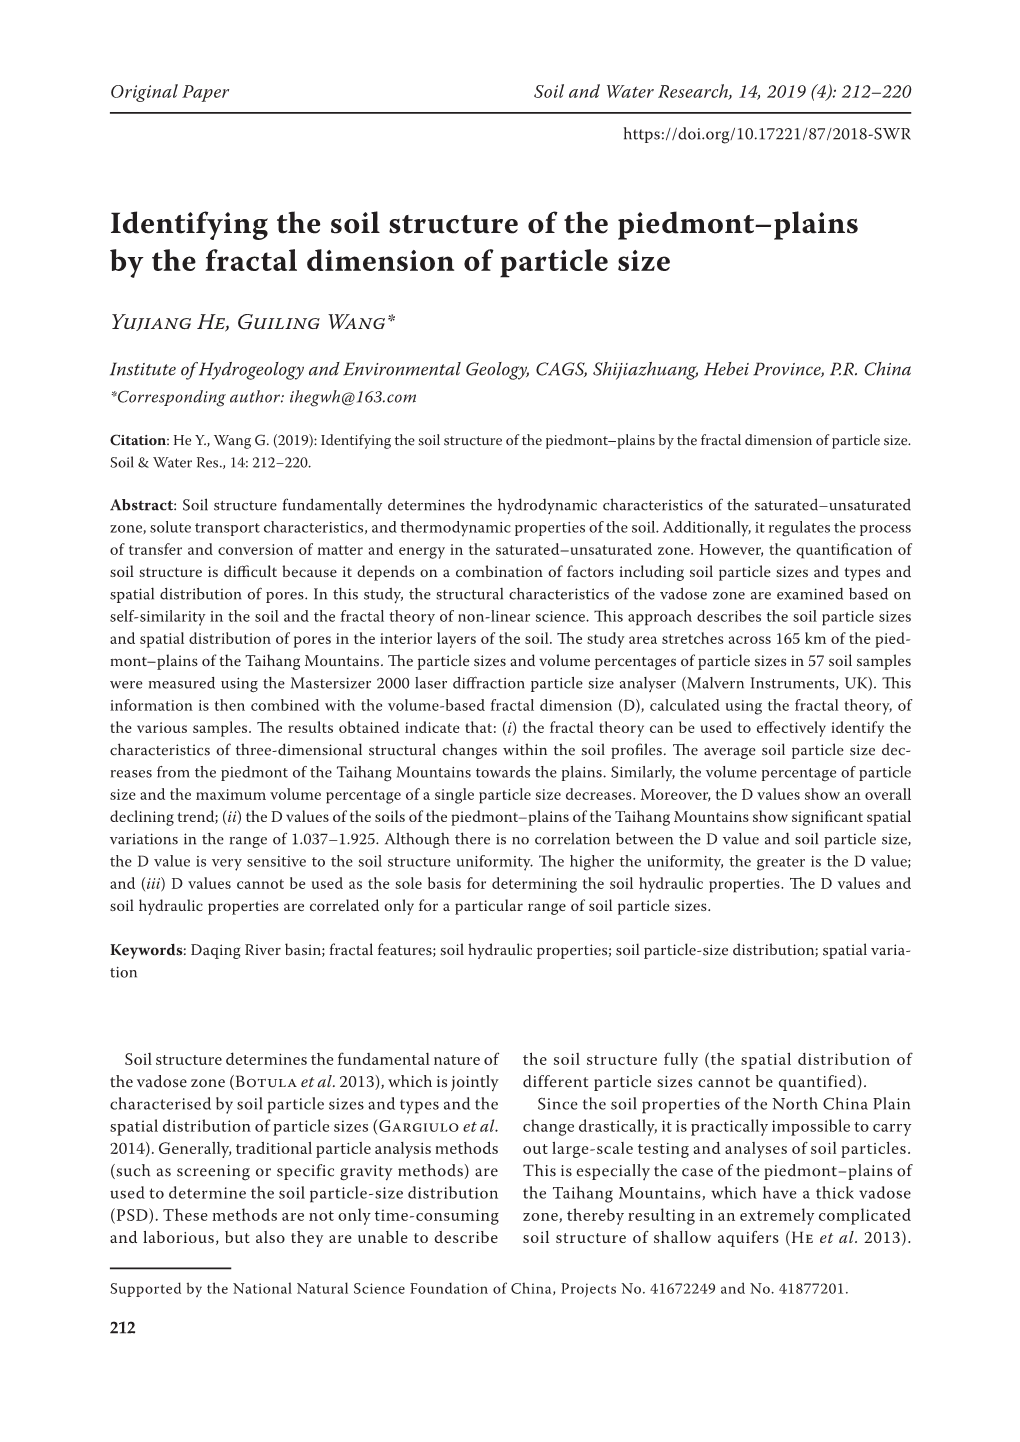 Identifying the Soil Structure of the Piedmont–Plains by the Fractal Dimension of Particle Size